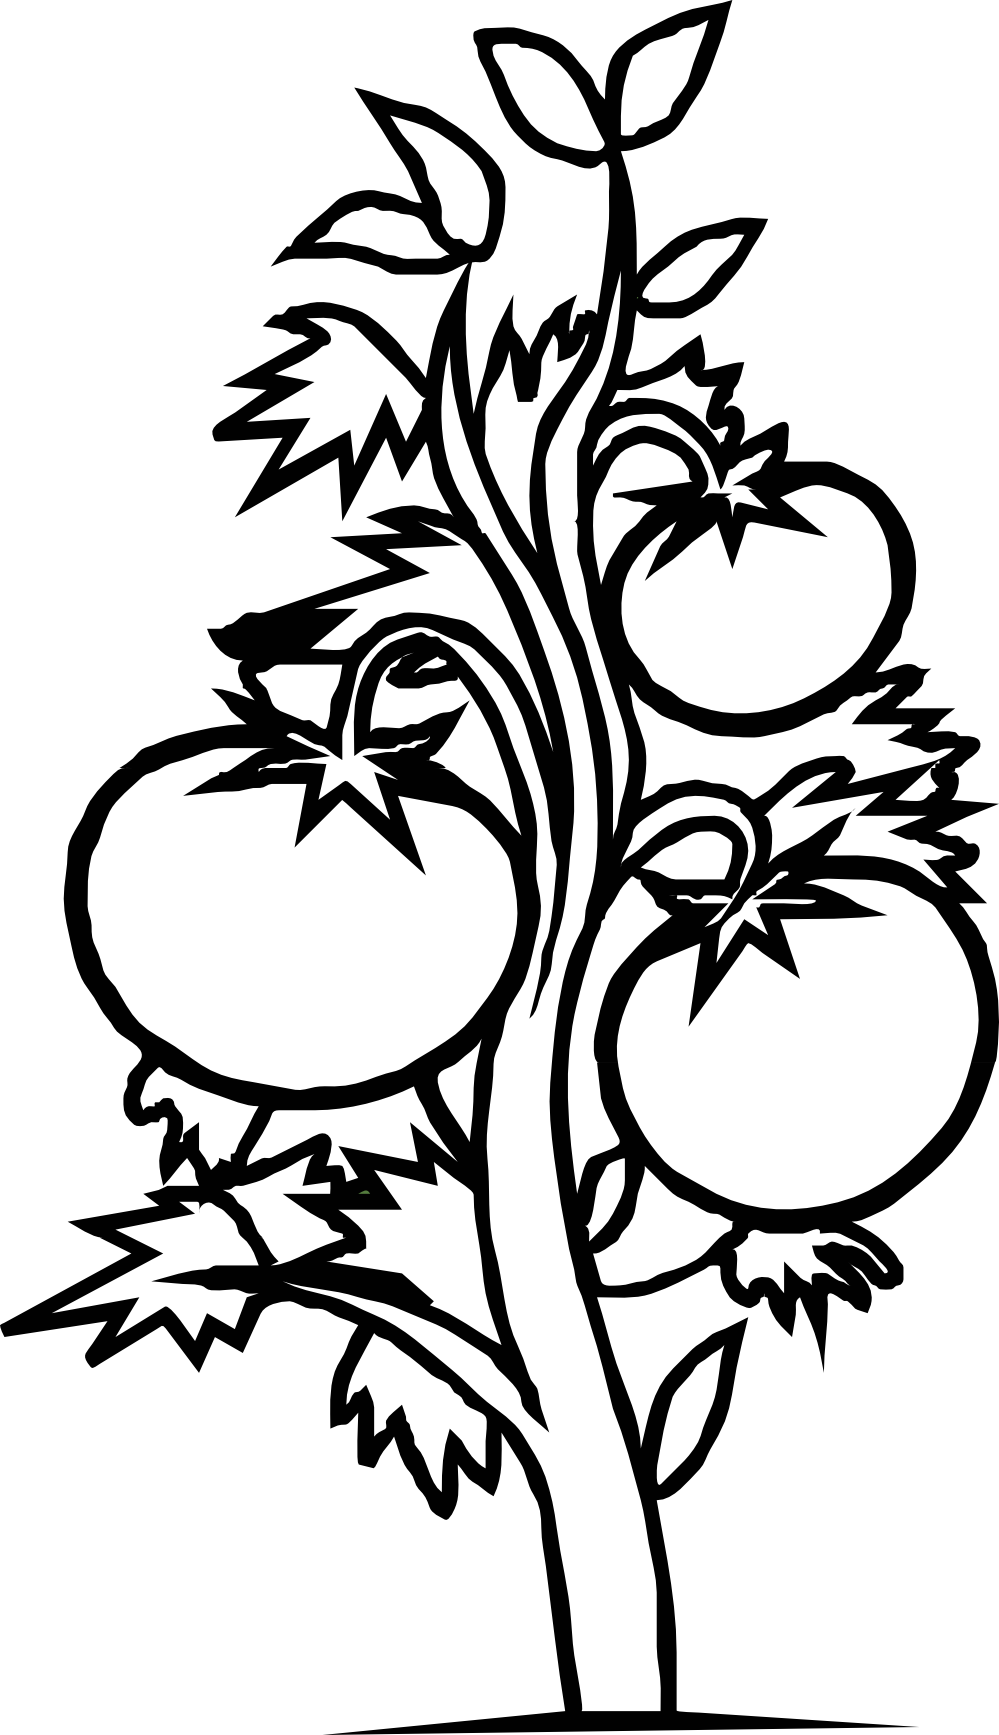 Pepper clipart black and white. Tomato panda free images